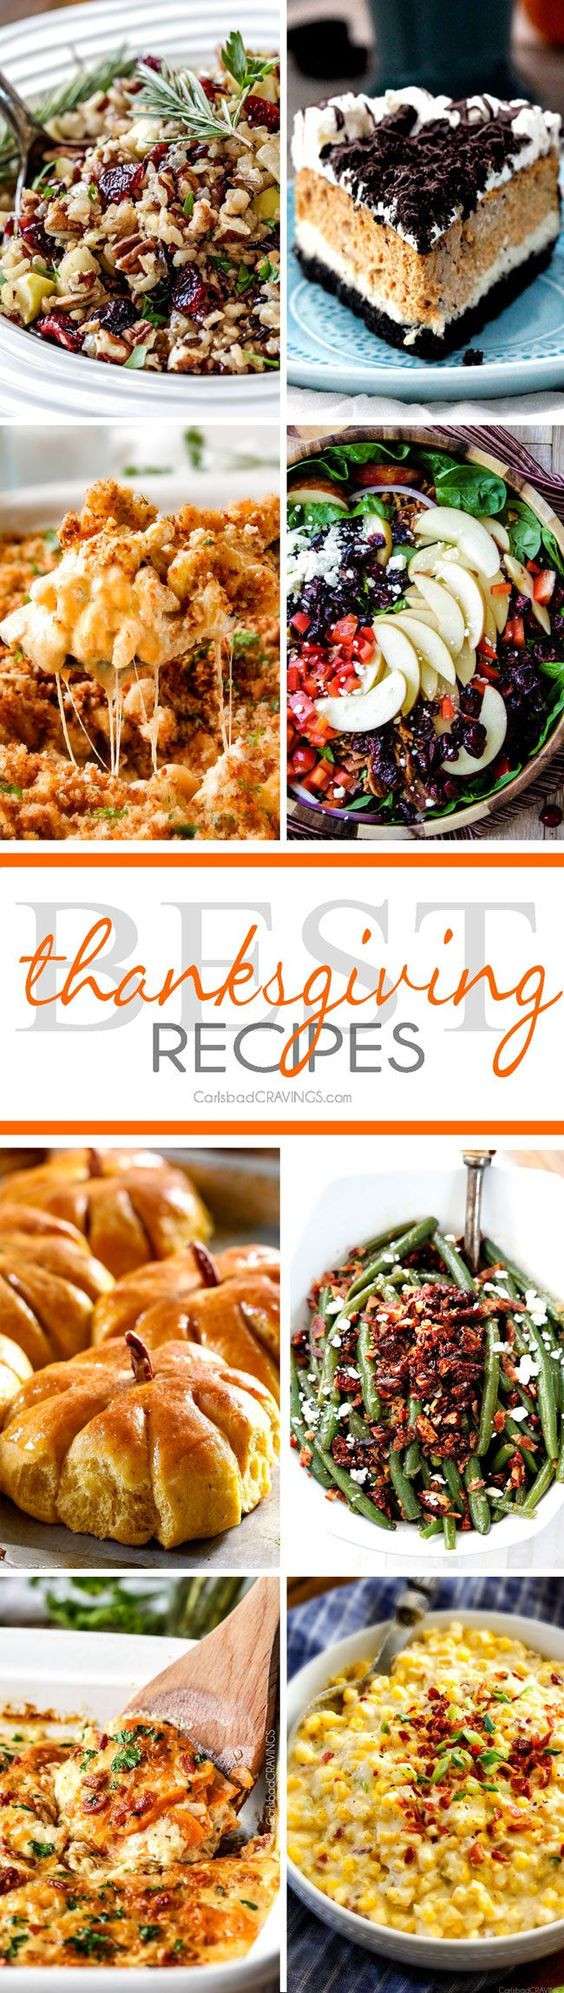 Appetizers For Thanksgiving Dinner
 Over 25 of the BEST Thanksgiving Recipes all in ONE spot